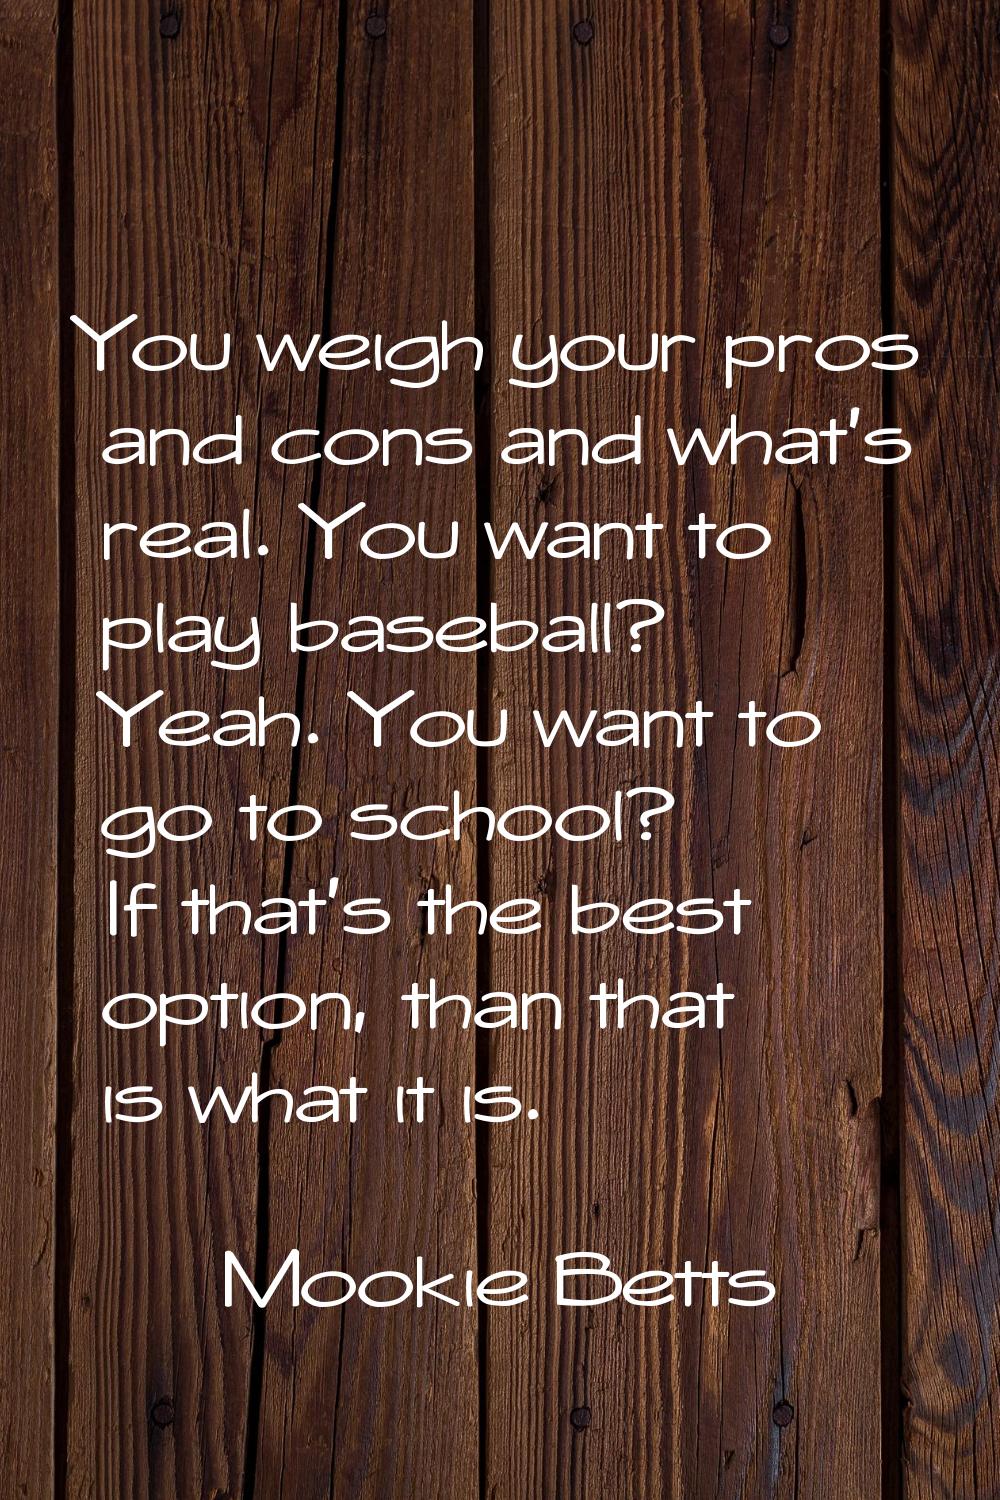 You weigh your pros and cons and what's real. You want to play baseball? Yeah. You want to go to sc